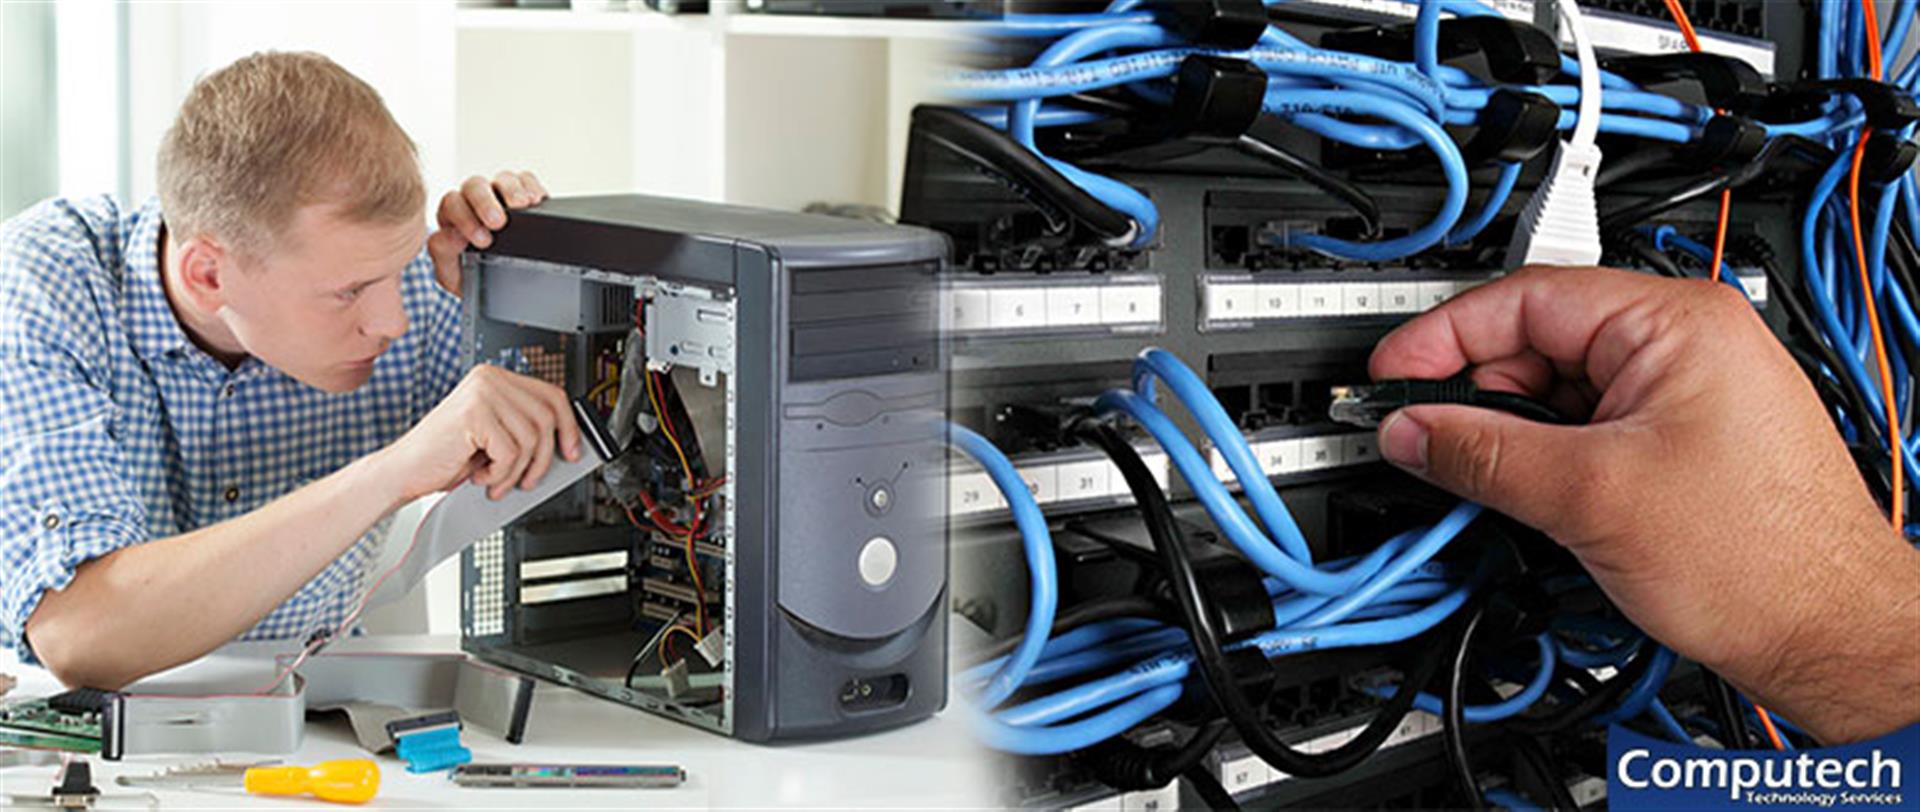 Springfield Tennessee Onsite PC & Printer Repairs, Network, Voice & Data Cabling Services